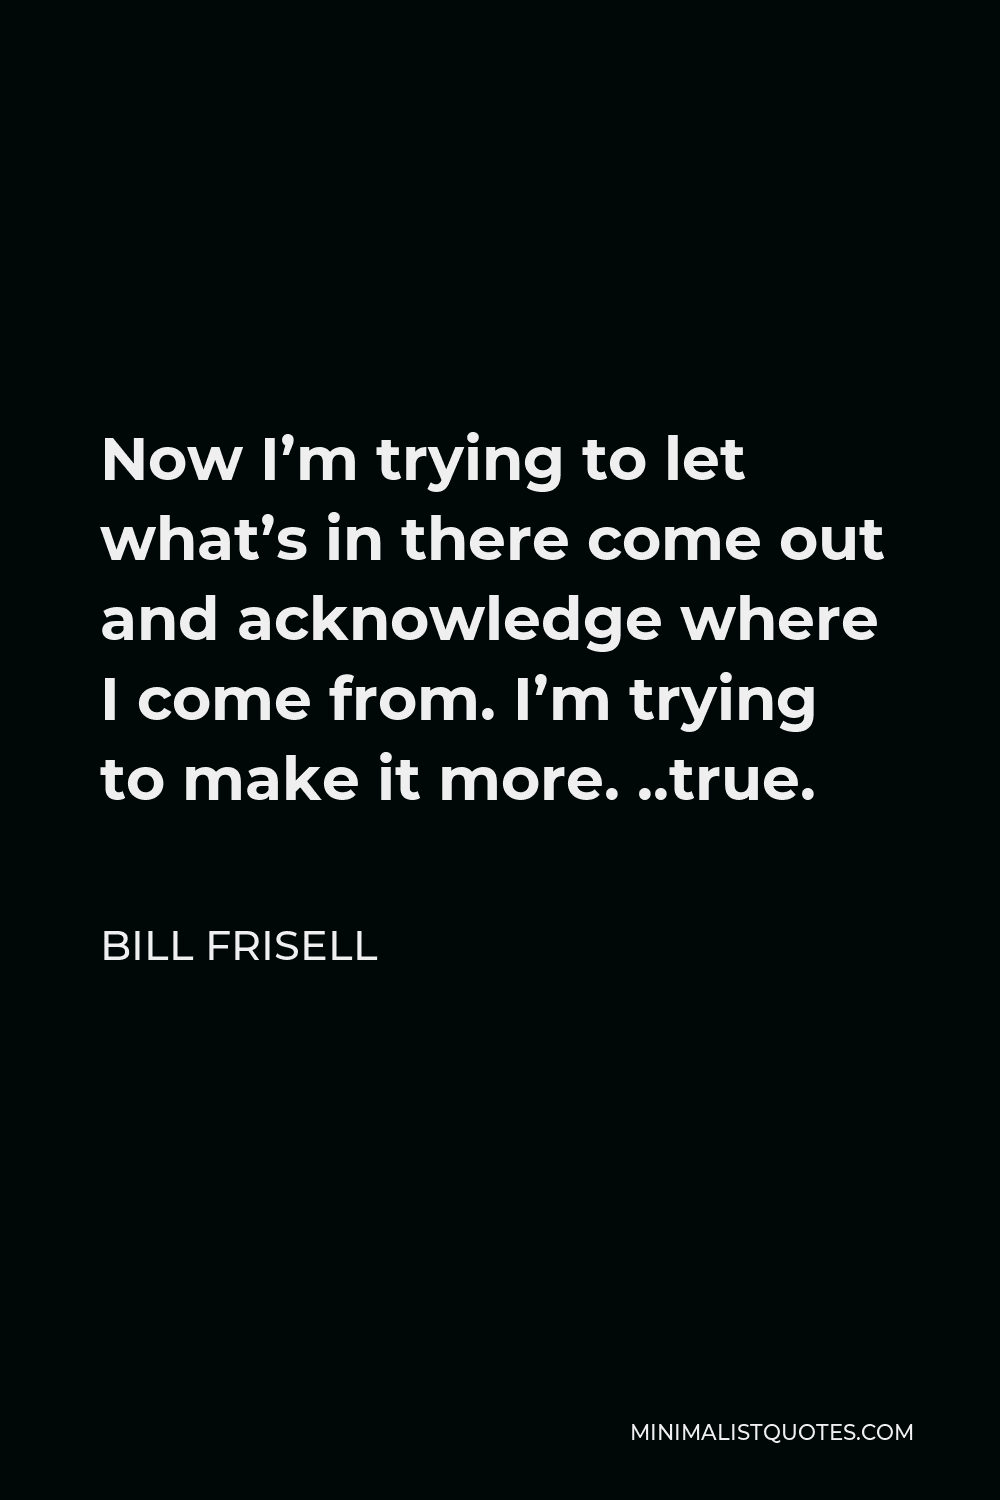 Bill Frisell Quote - Now I’m trying to let what’s in there come out and acknowledge where I come from. I’m trying to make it more. ..true.